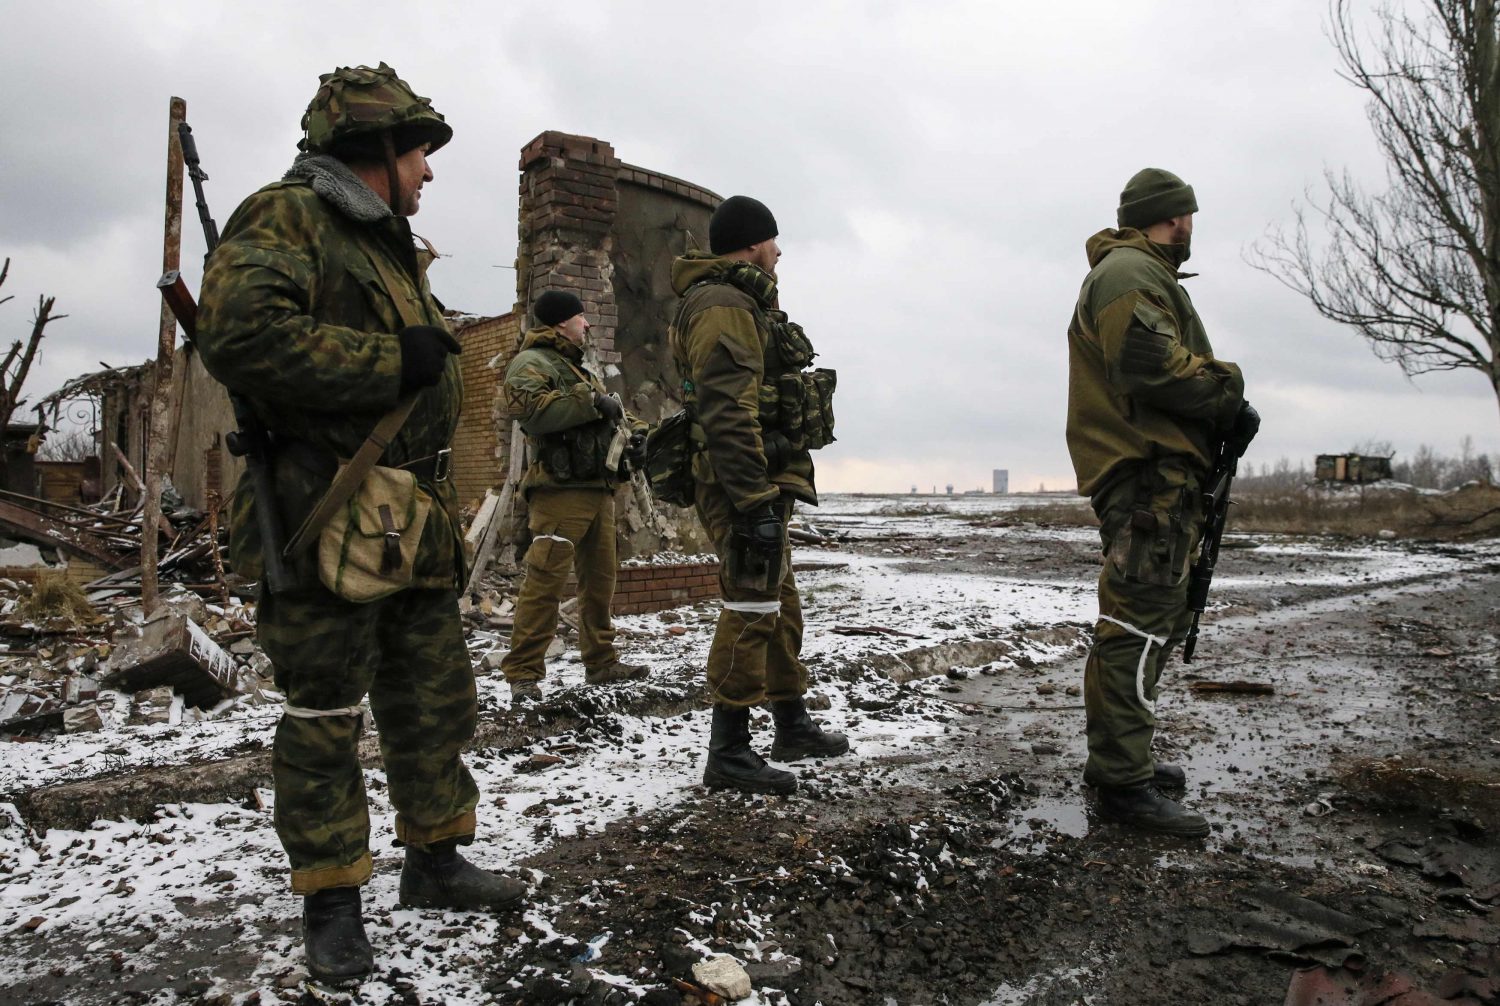 Members of the armed forces of the separatist self-proclaimed Donetsk People's Republic look at the positions of the Ukrainian armed forces in Vuhlehirsk